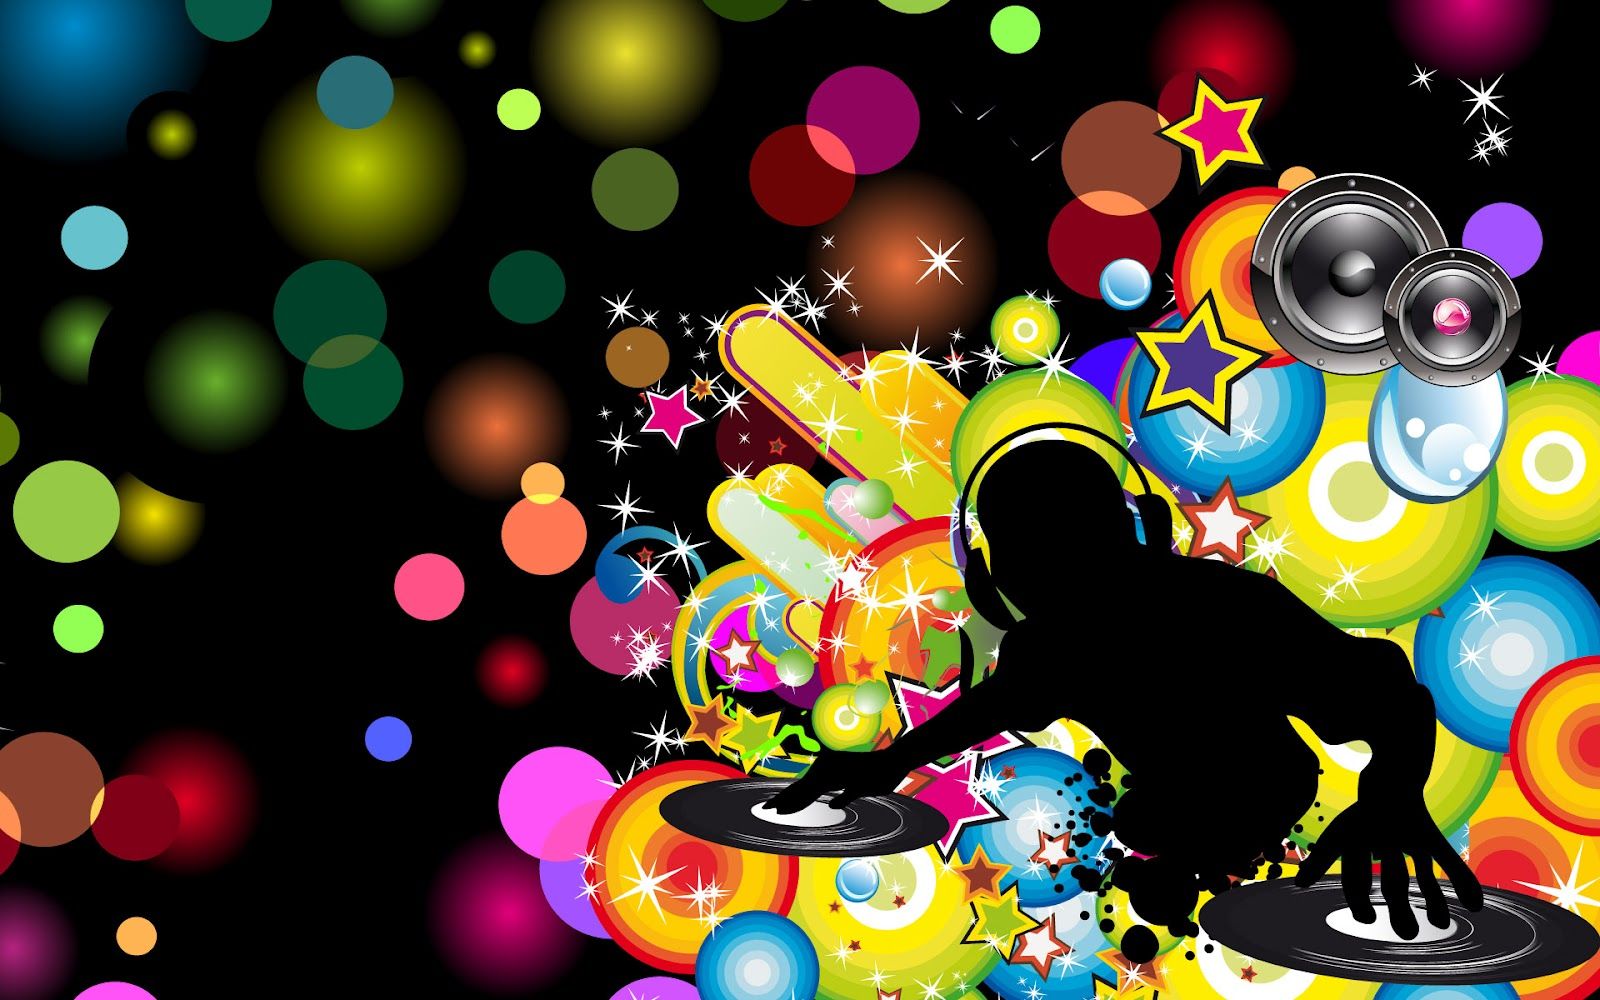 Party all night on dubstep wallpaper. Home of Wallpaper. Free download HD wallpaper